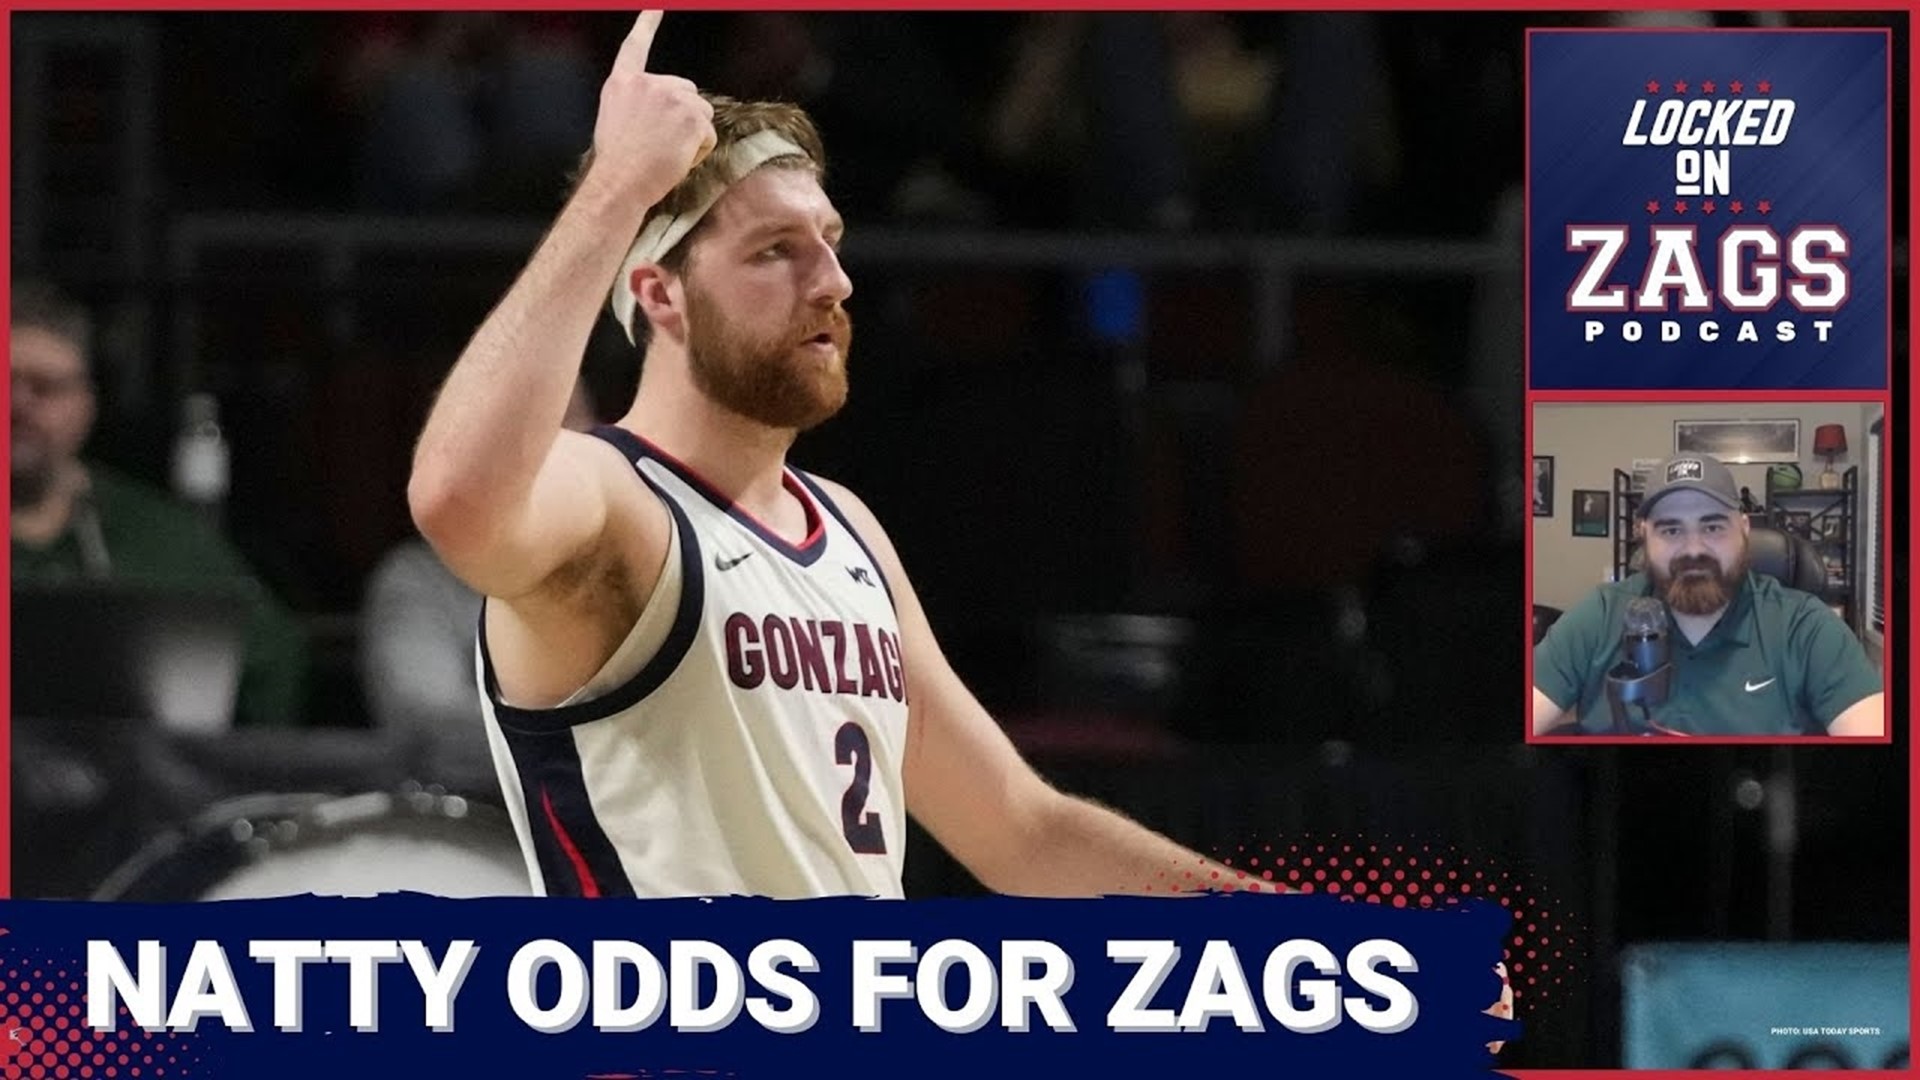 The Gonzaga Bulldogs are the highest scoring offensive team in the country, while also boasting the second best field goal percentage.